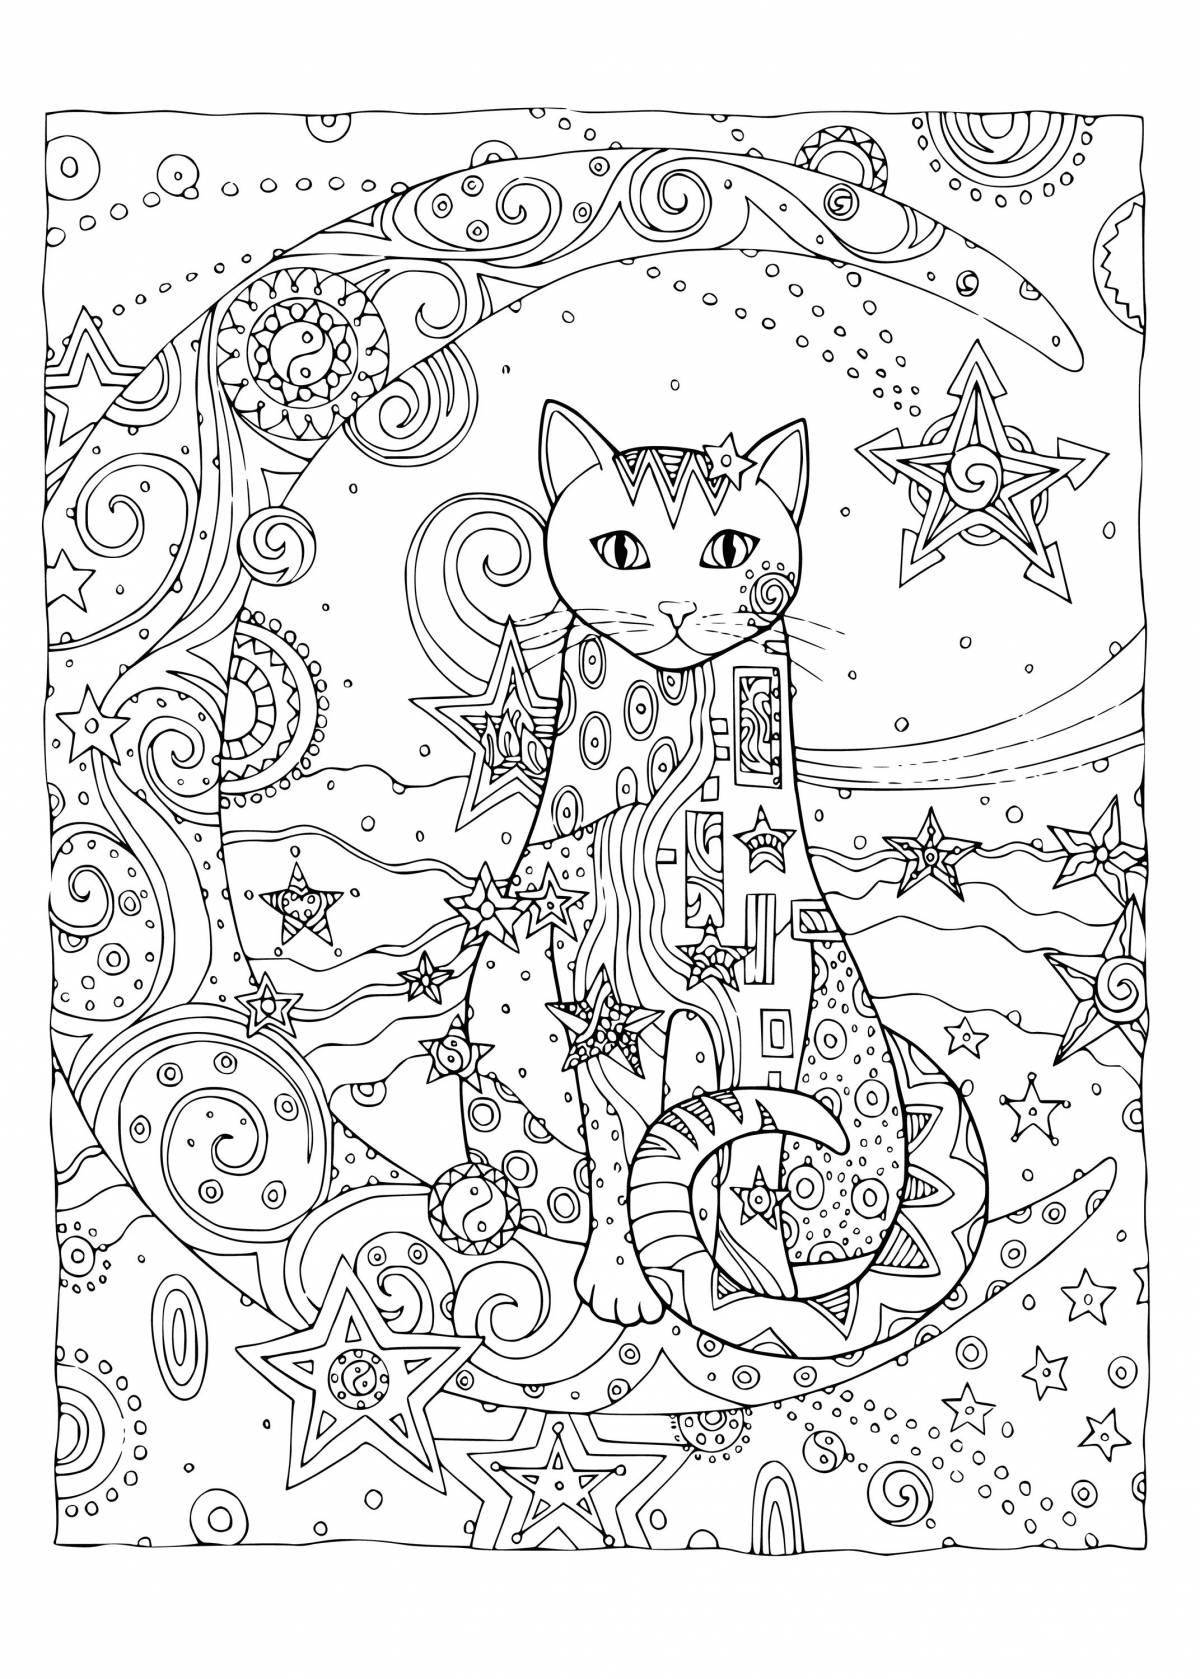 Fancy patterned cat coloring book